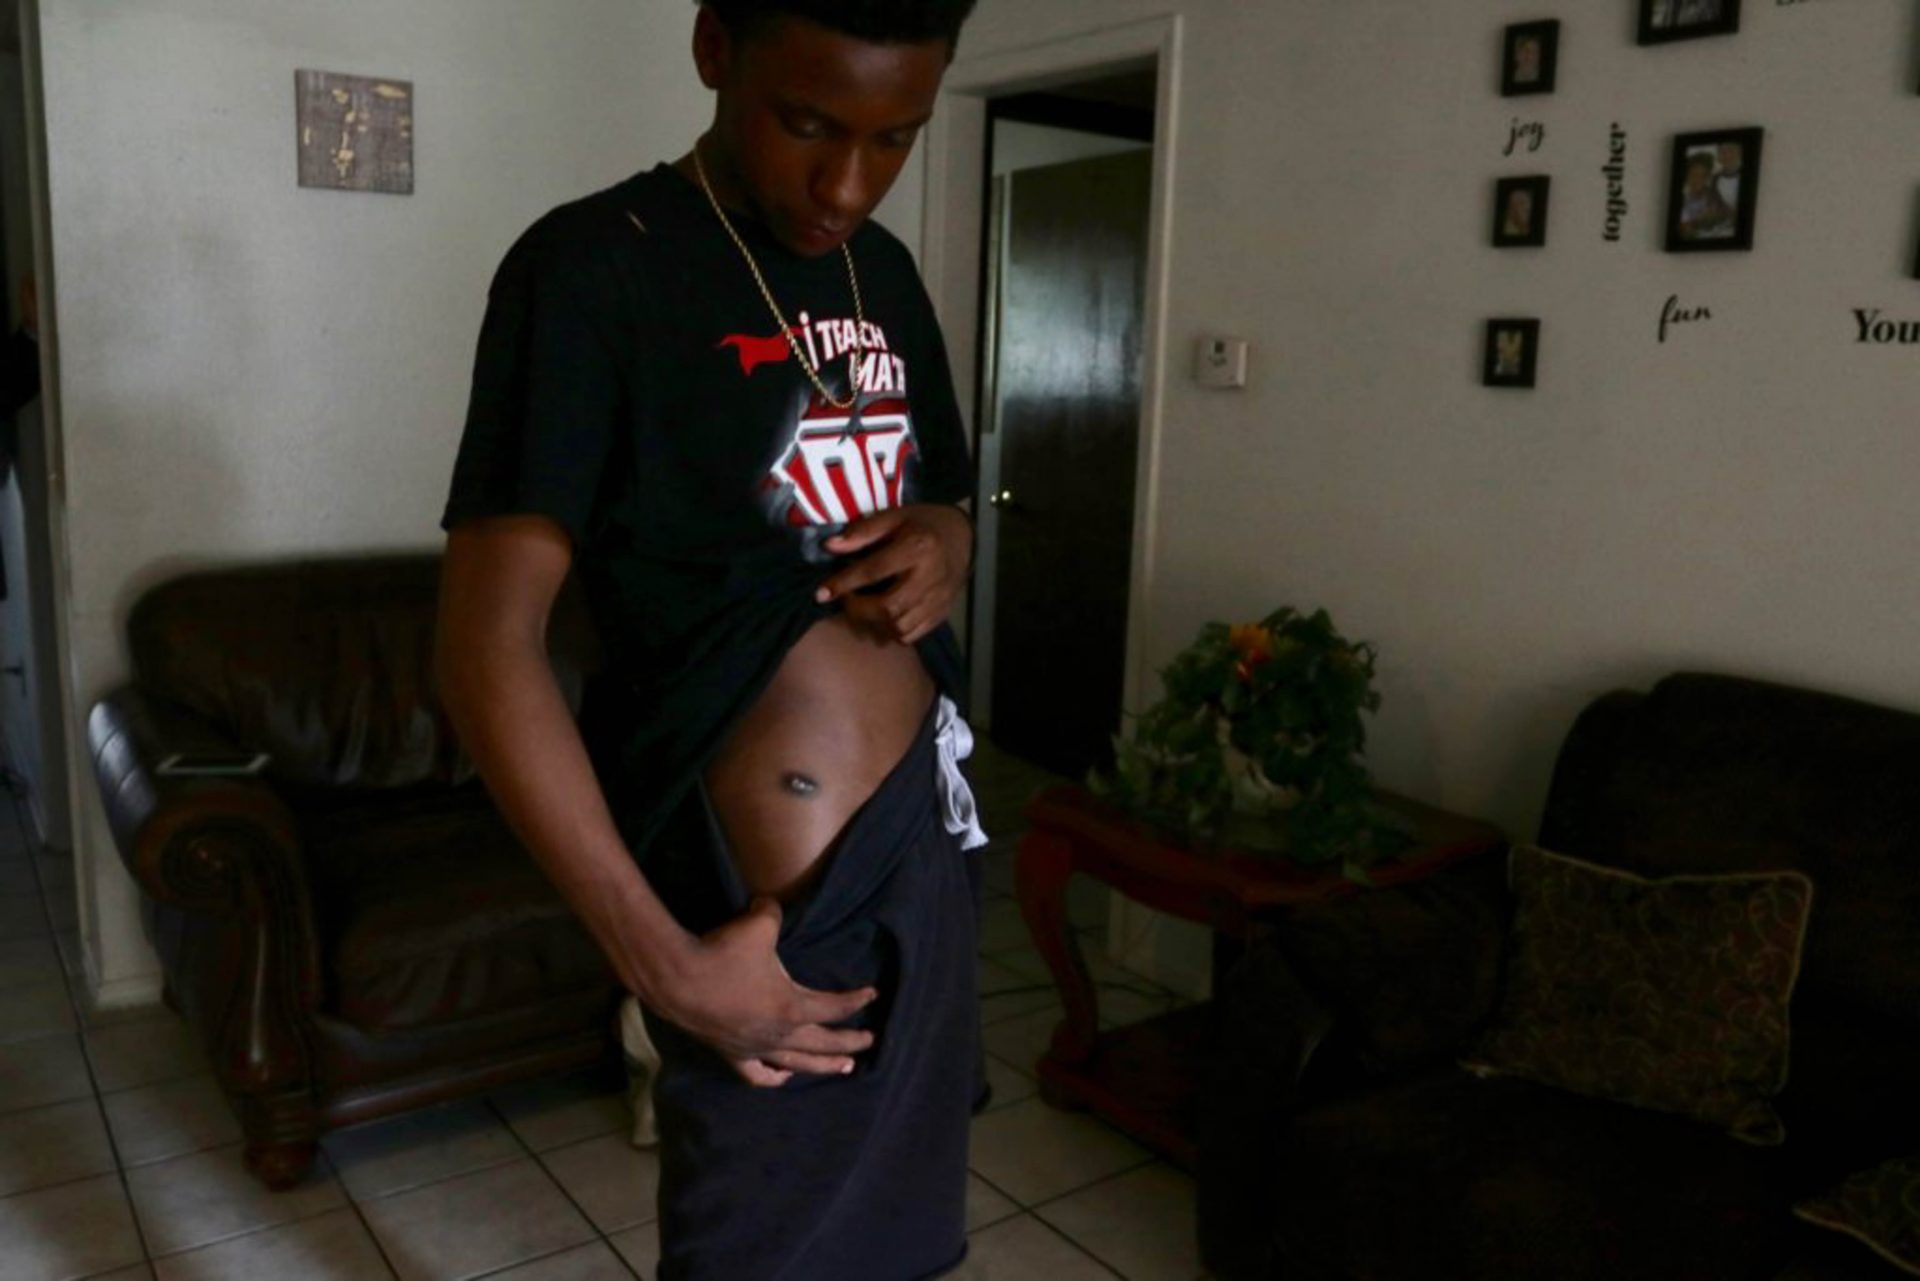 Lorenzo Clerkley moves his clothes to show a bullet wound in his thigh.